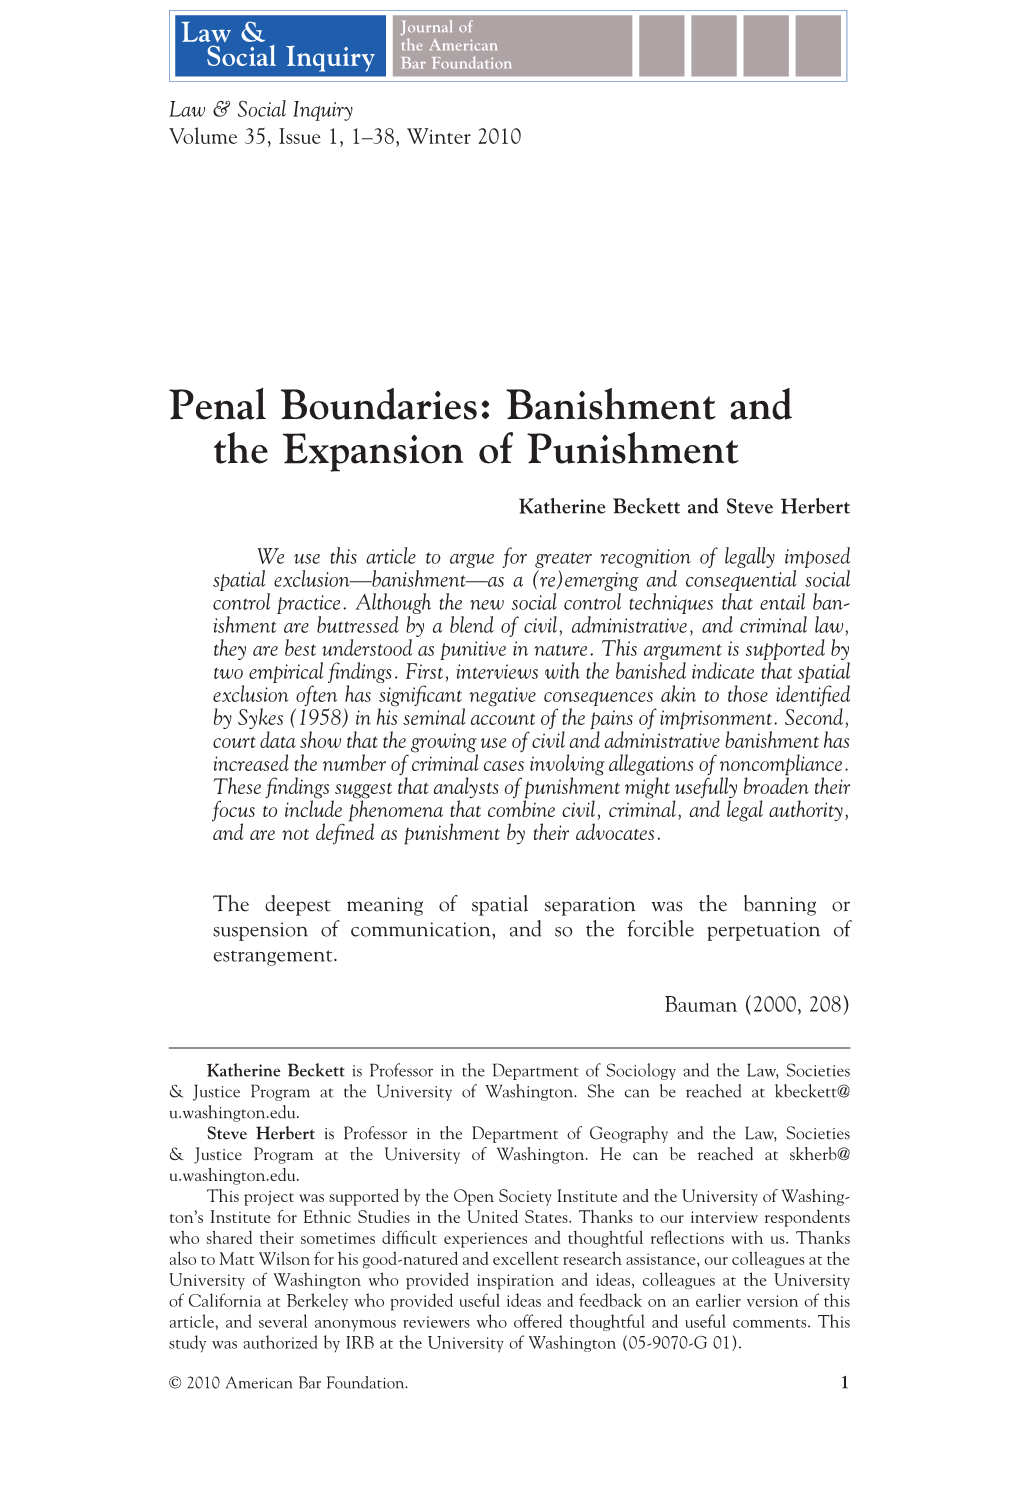 Penal Boundaries: Banishment and the Expansion Of